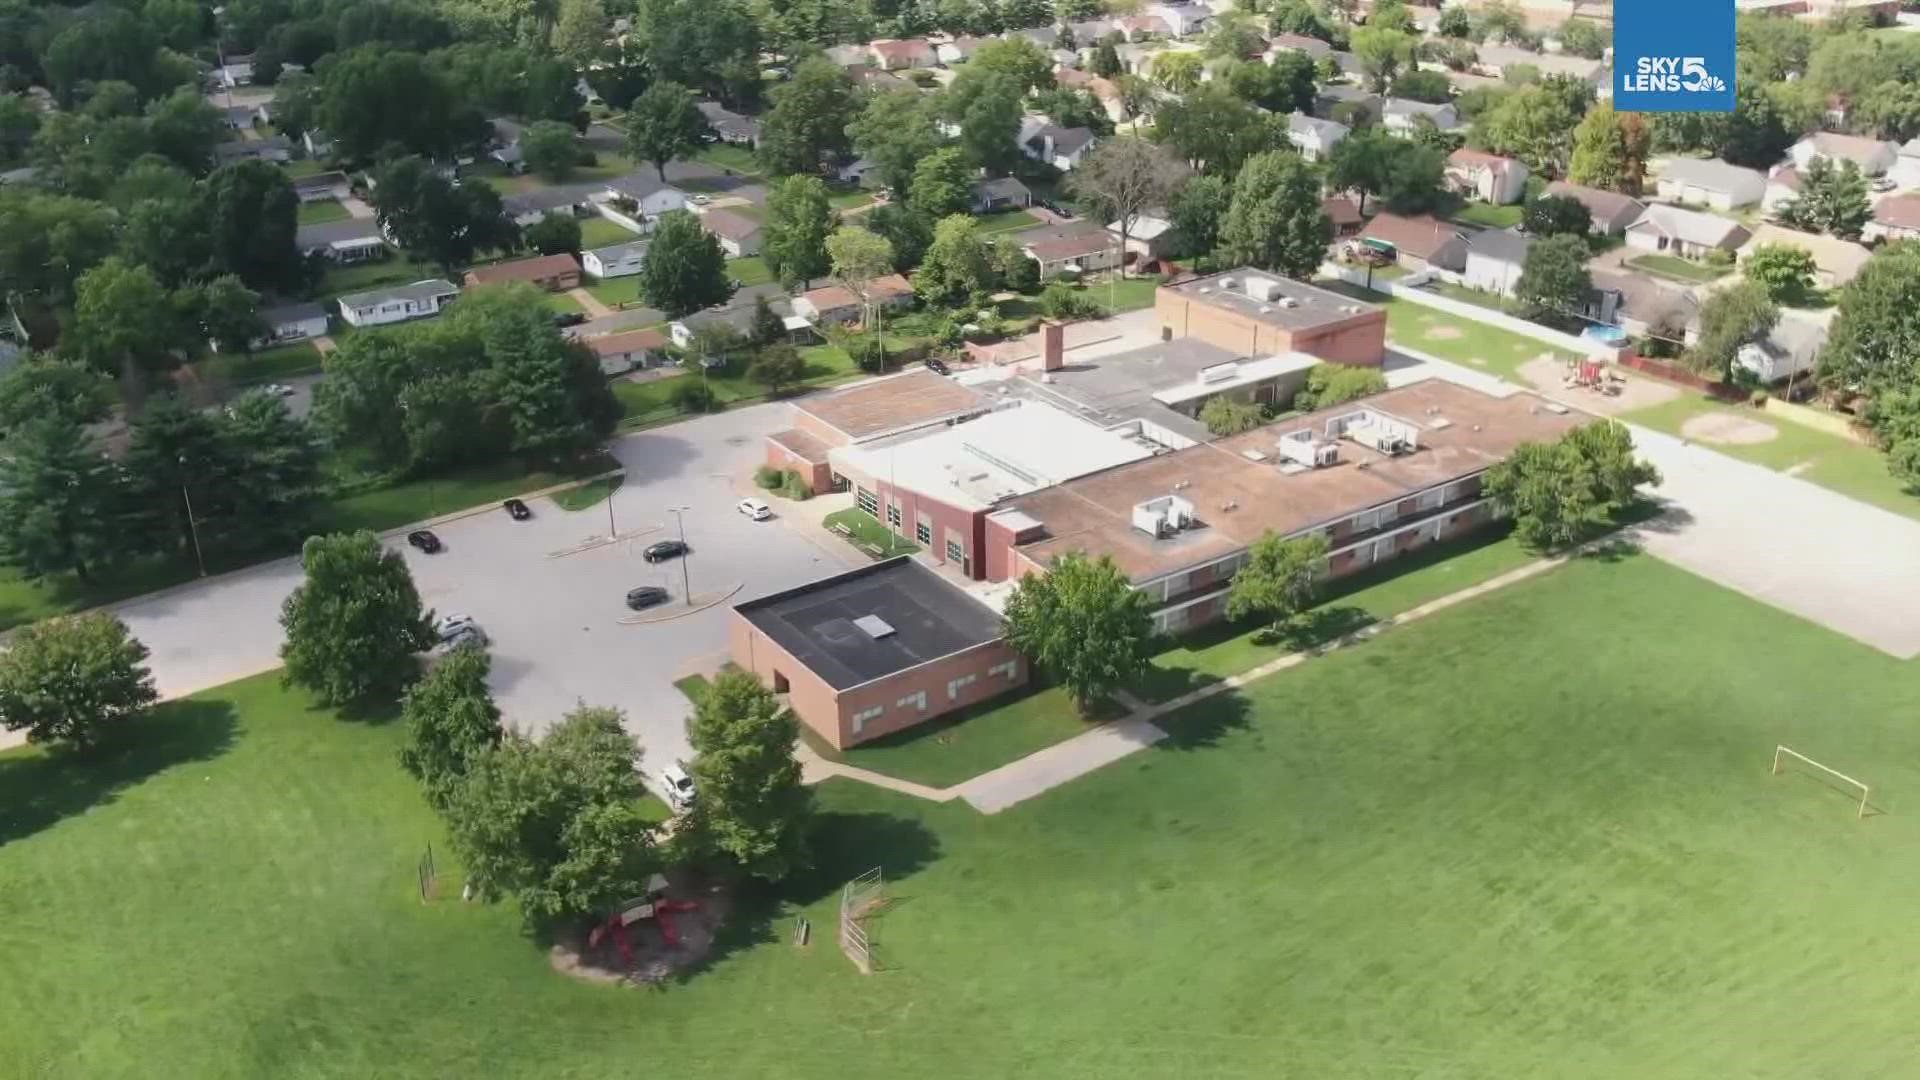 The study showed high levels of radioactive lead at the St. Louis area school, It was found in the cafeteria, library, boiler room and areas in the playground.